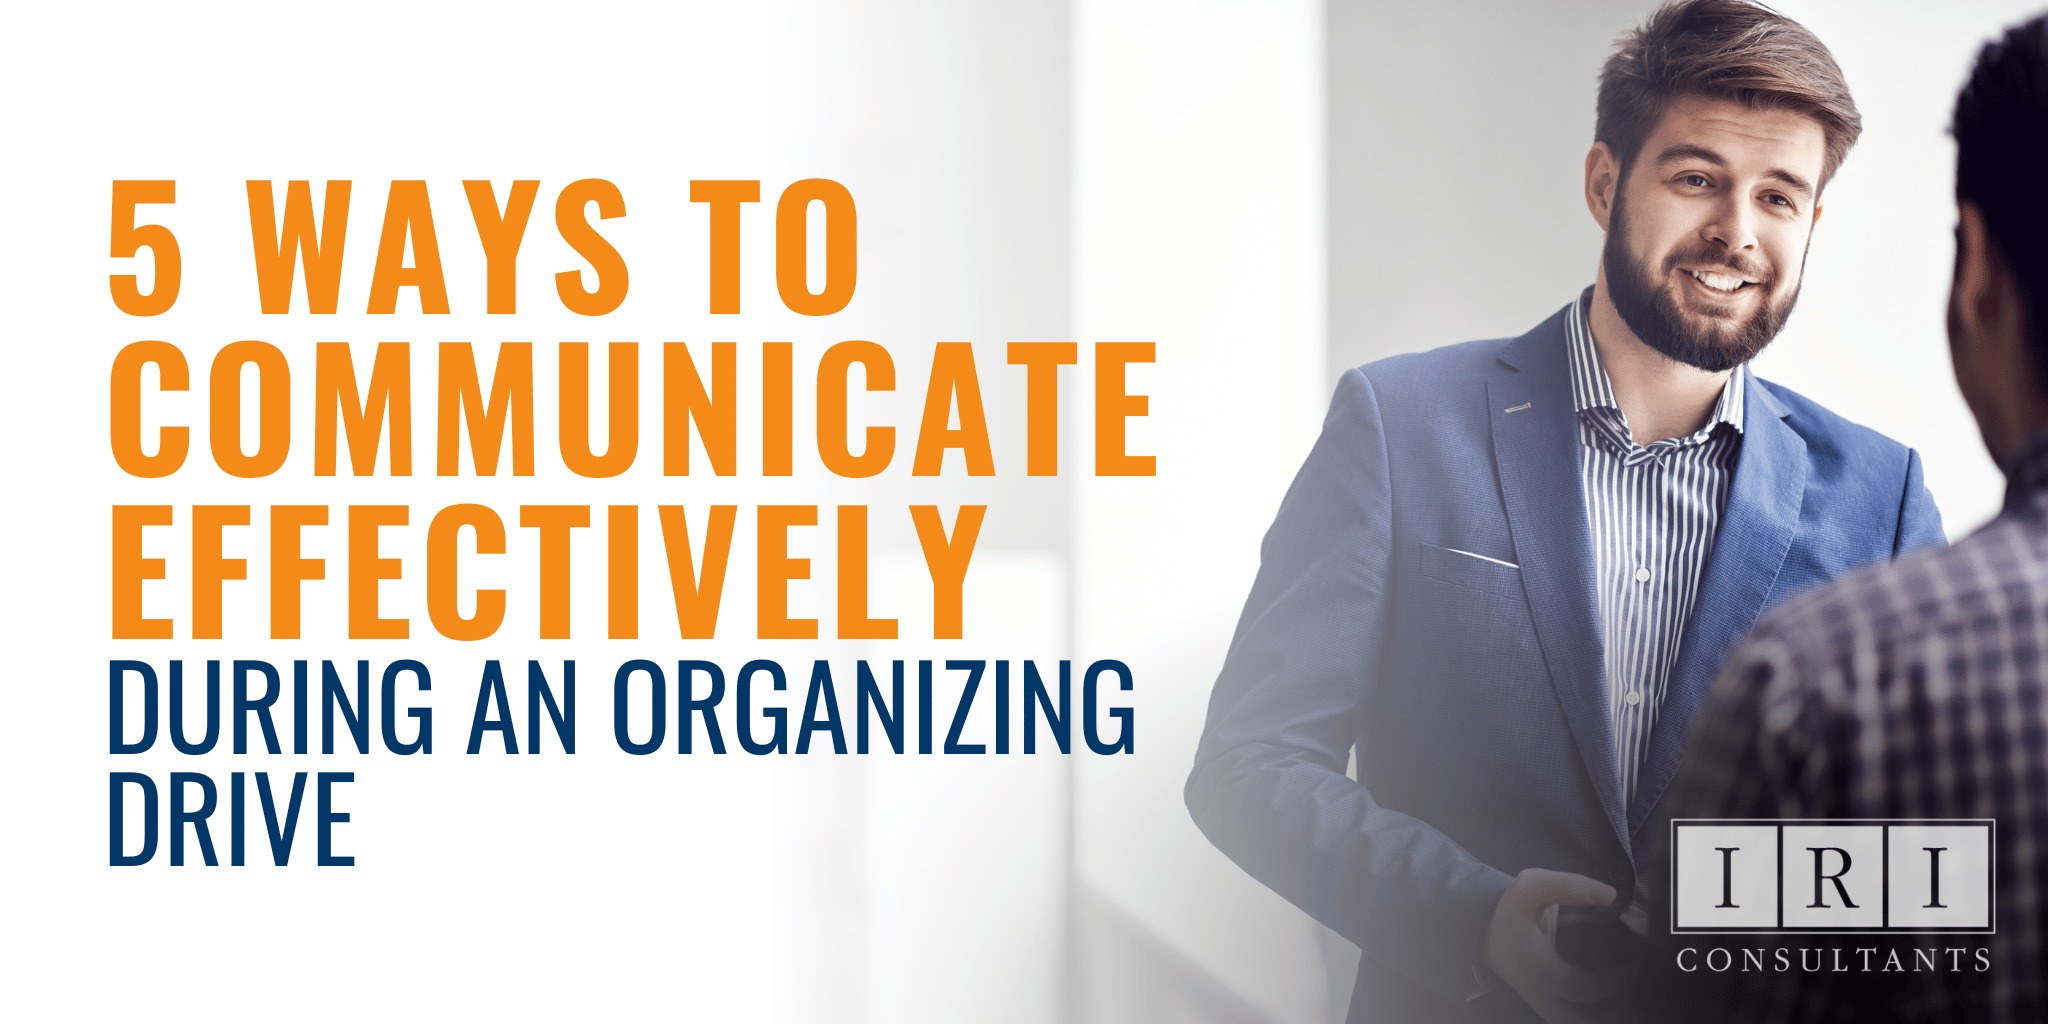 5 Ways to Communicate Effectively During An Organizing Drive